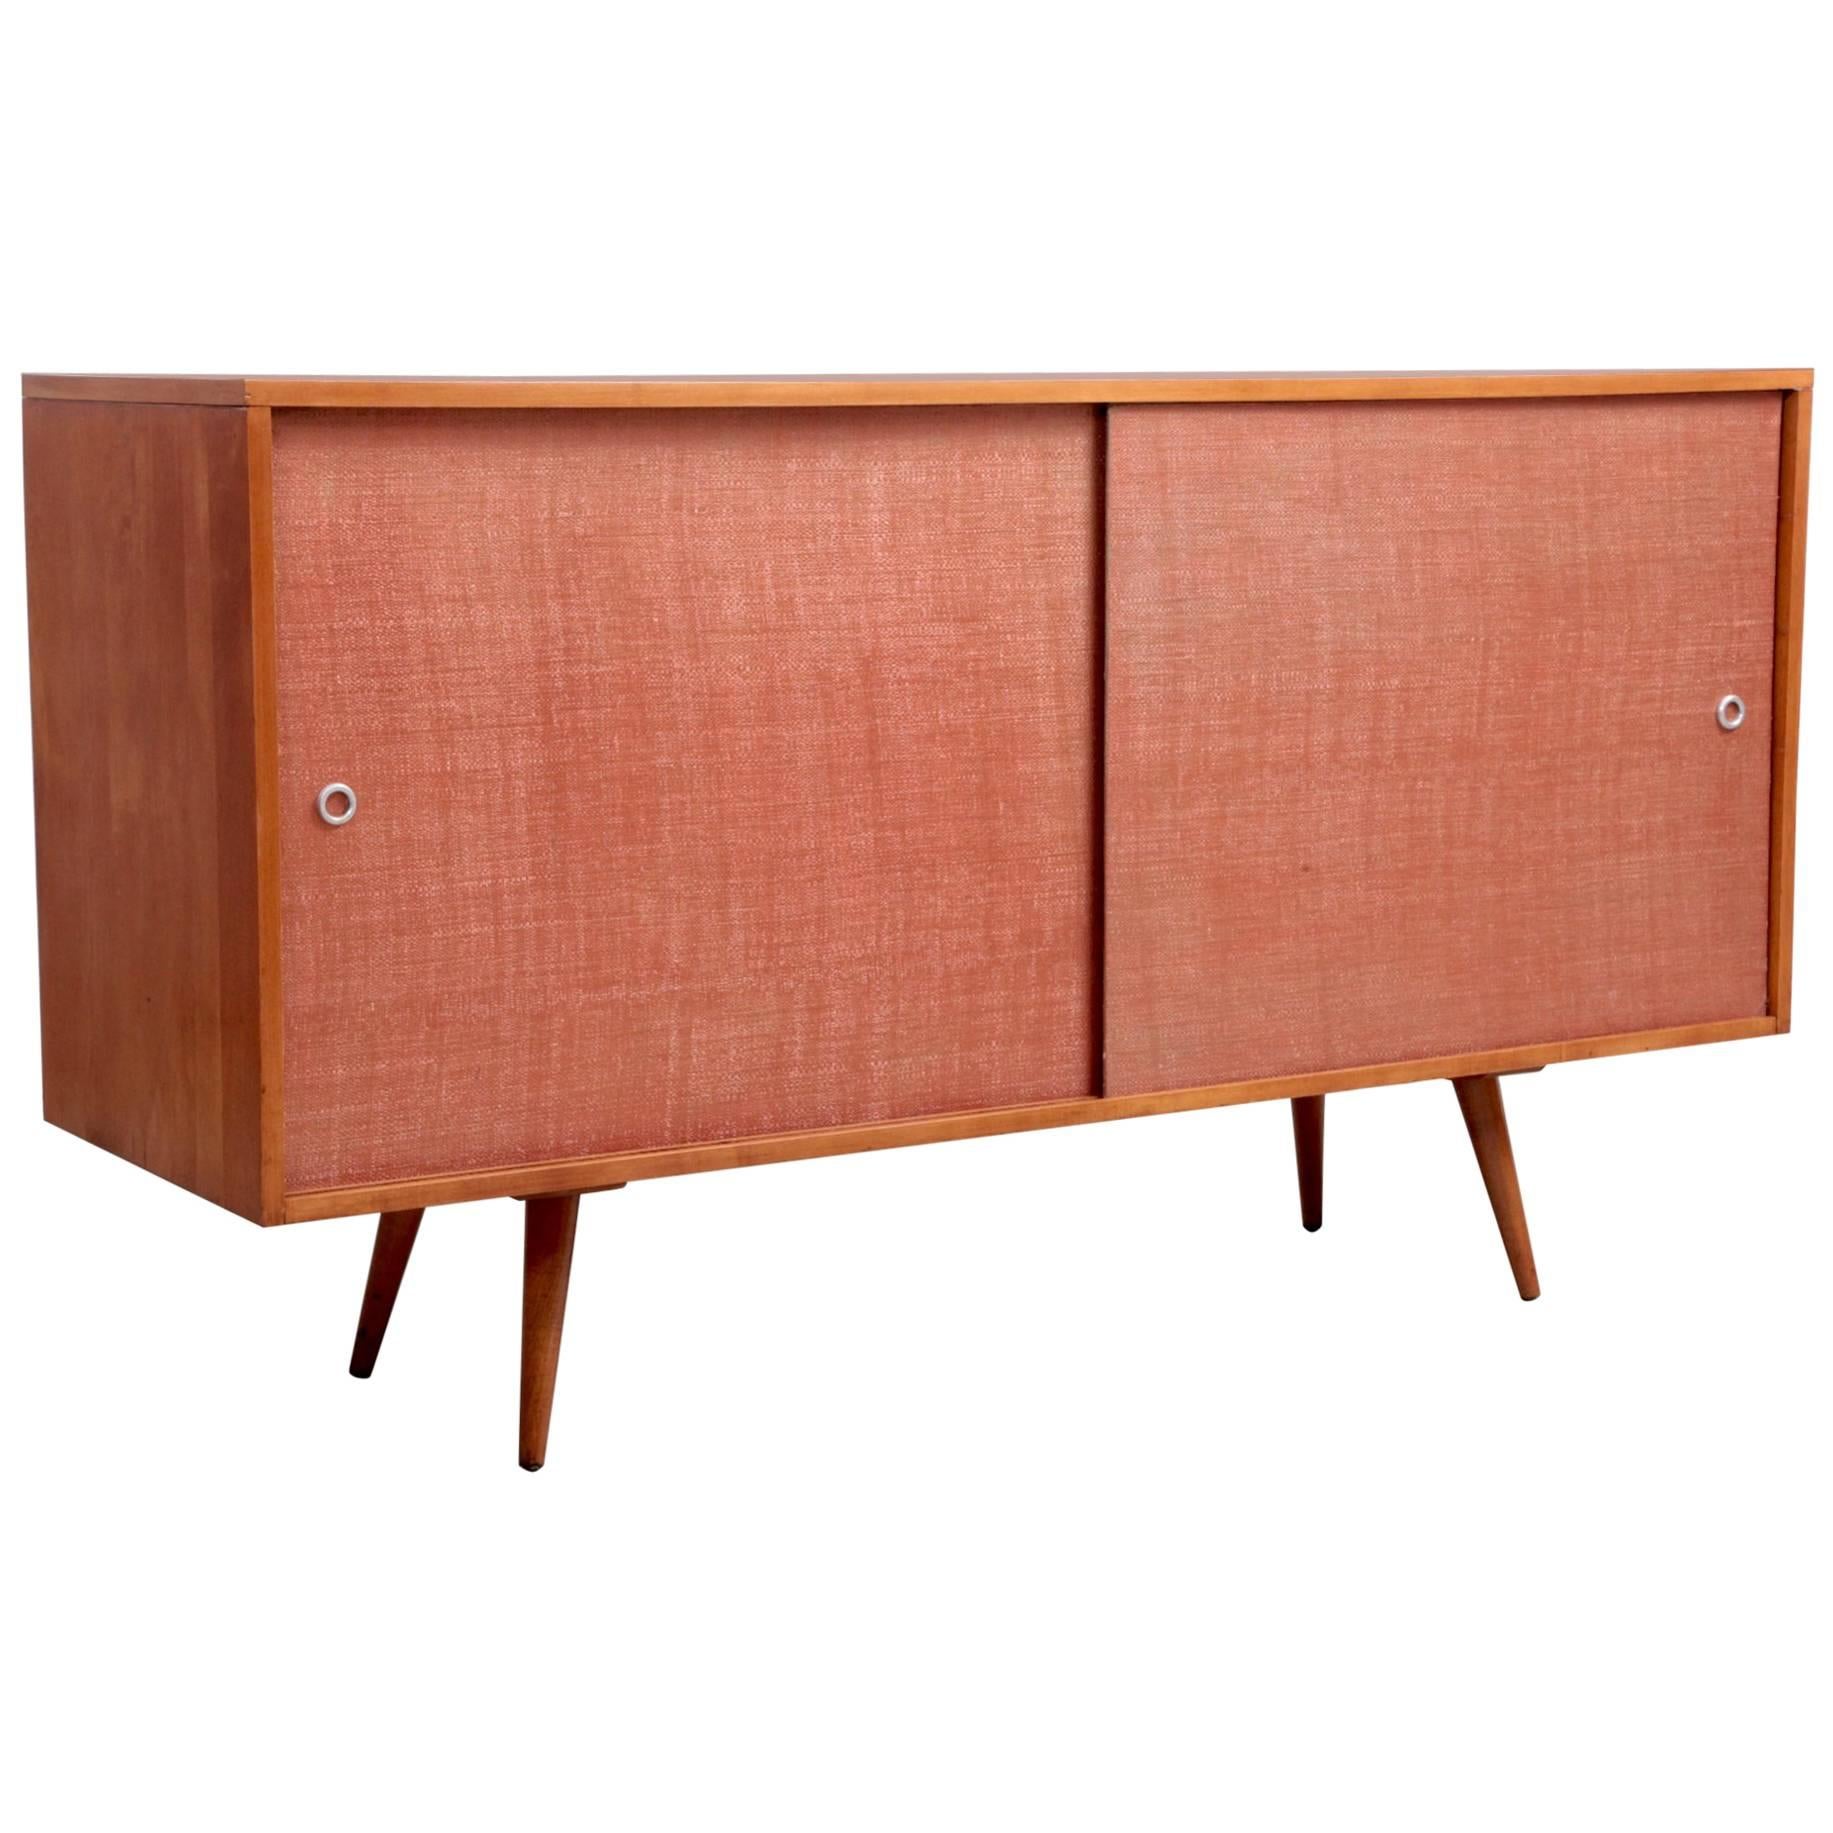 Paul McCobb Planner Group Credenza or Chest of Drawers for Winchendon